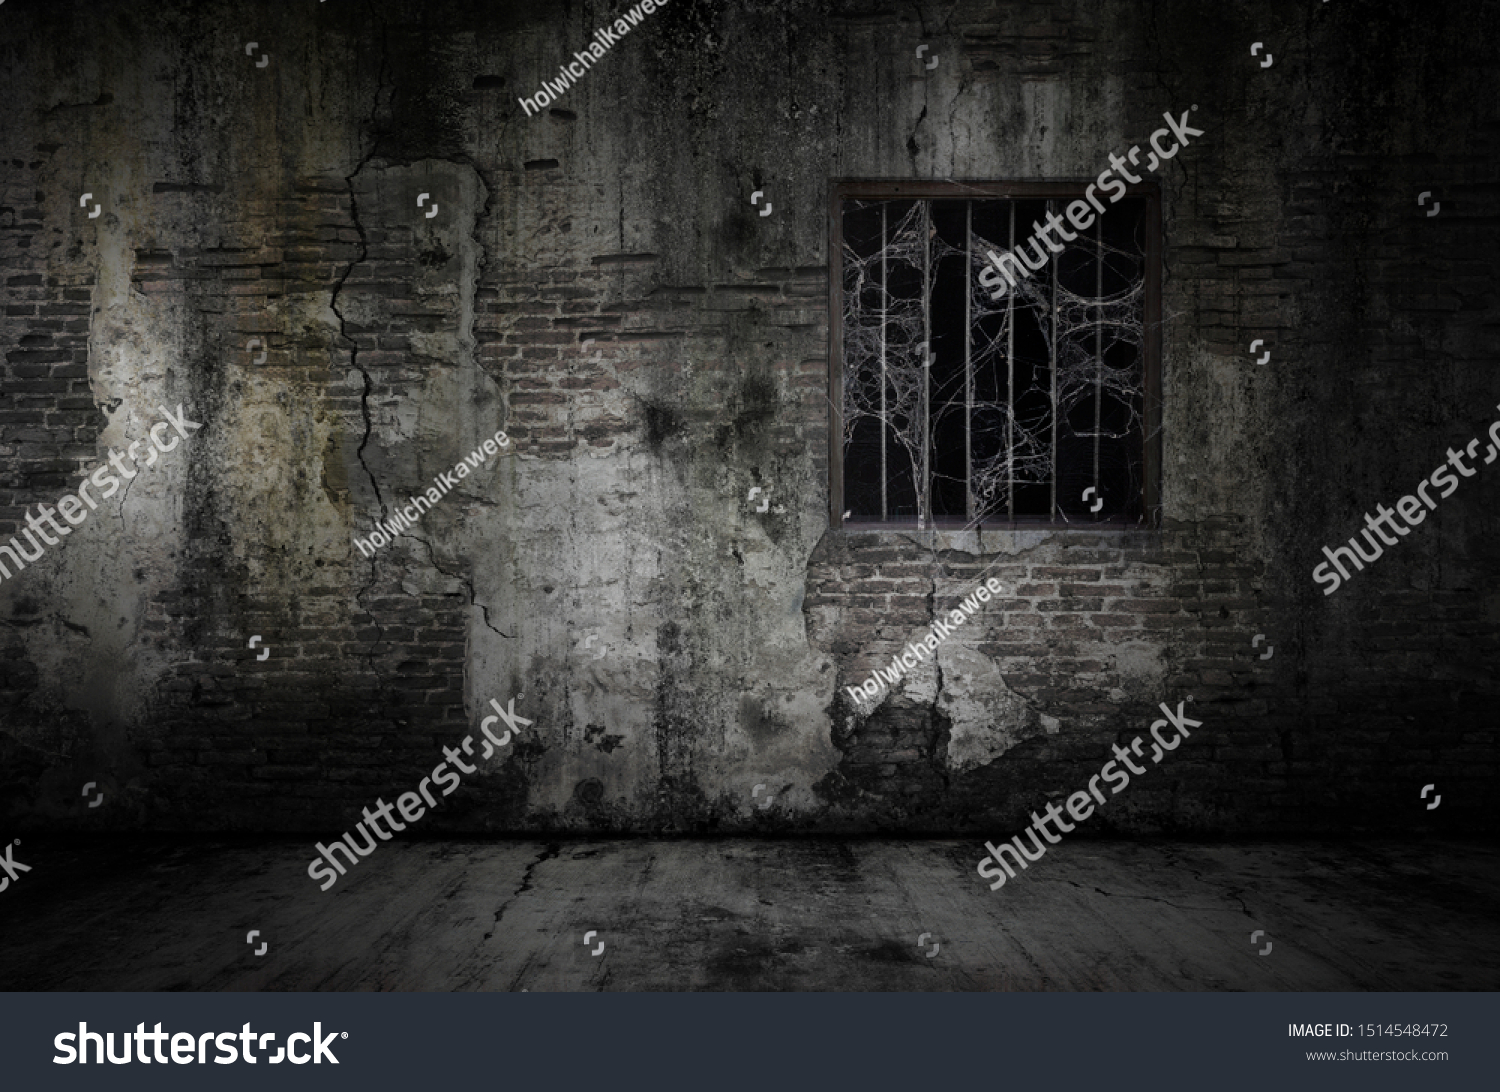 Window and rusty bars covered with cob web or spider web on prison old bricks wall and dusty floor, concept of horror and Halloween #1514548472